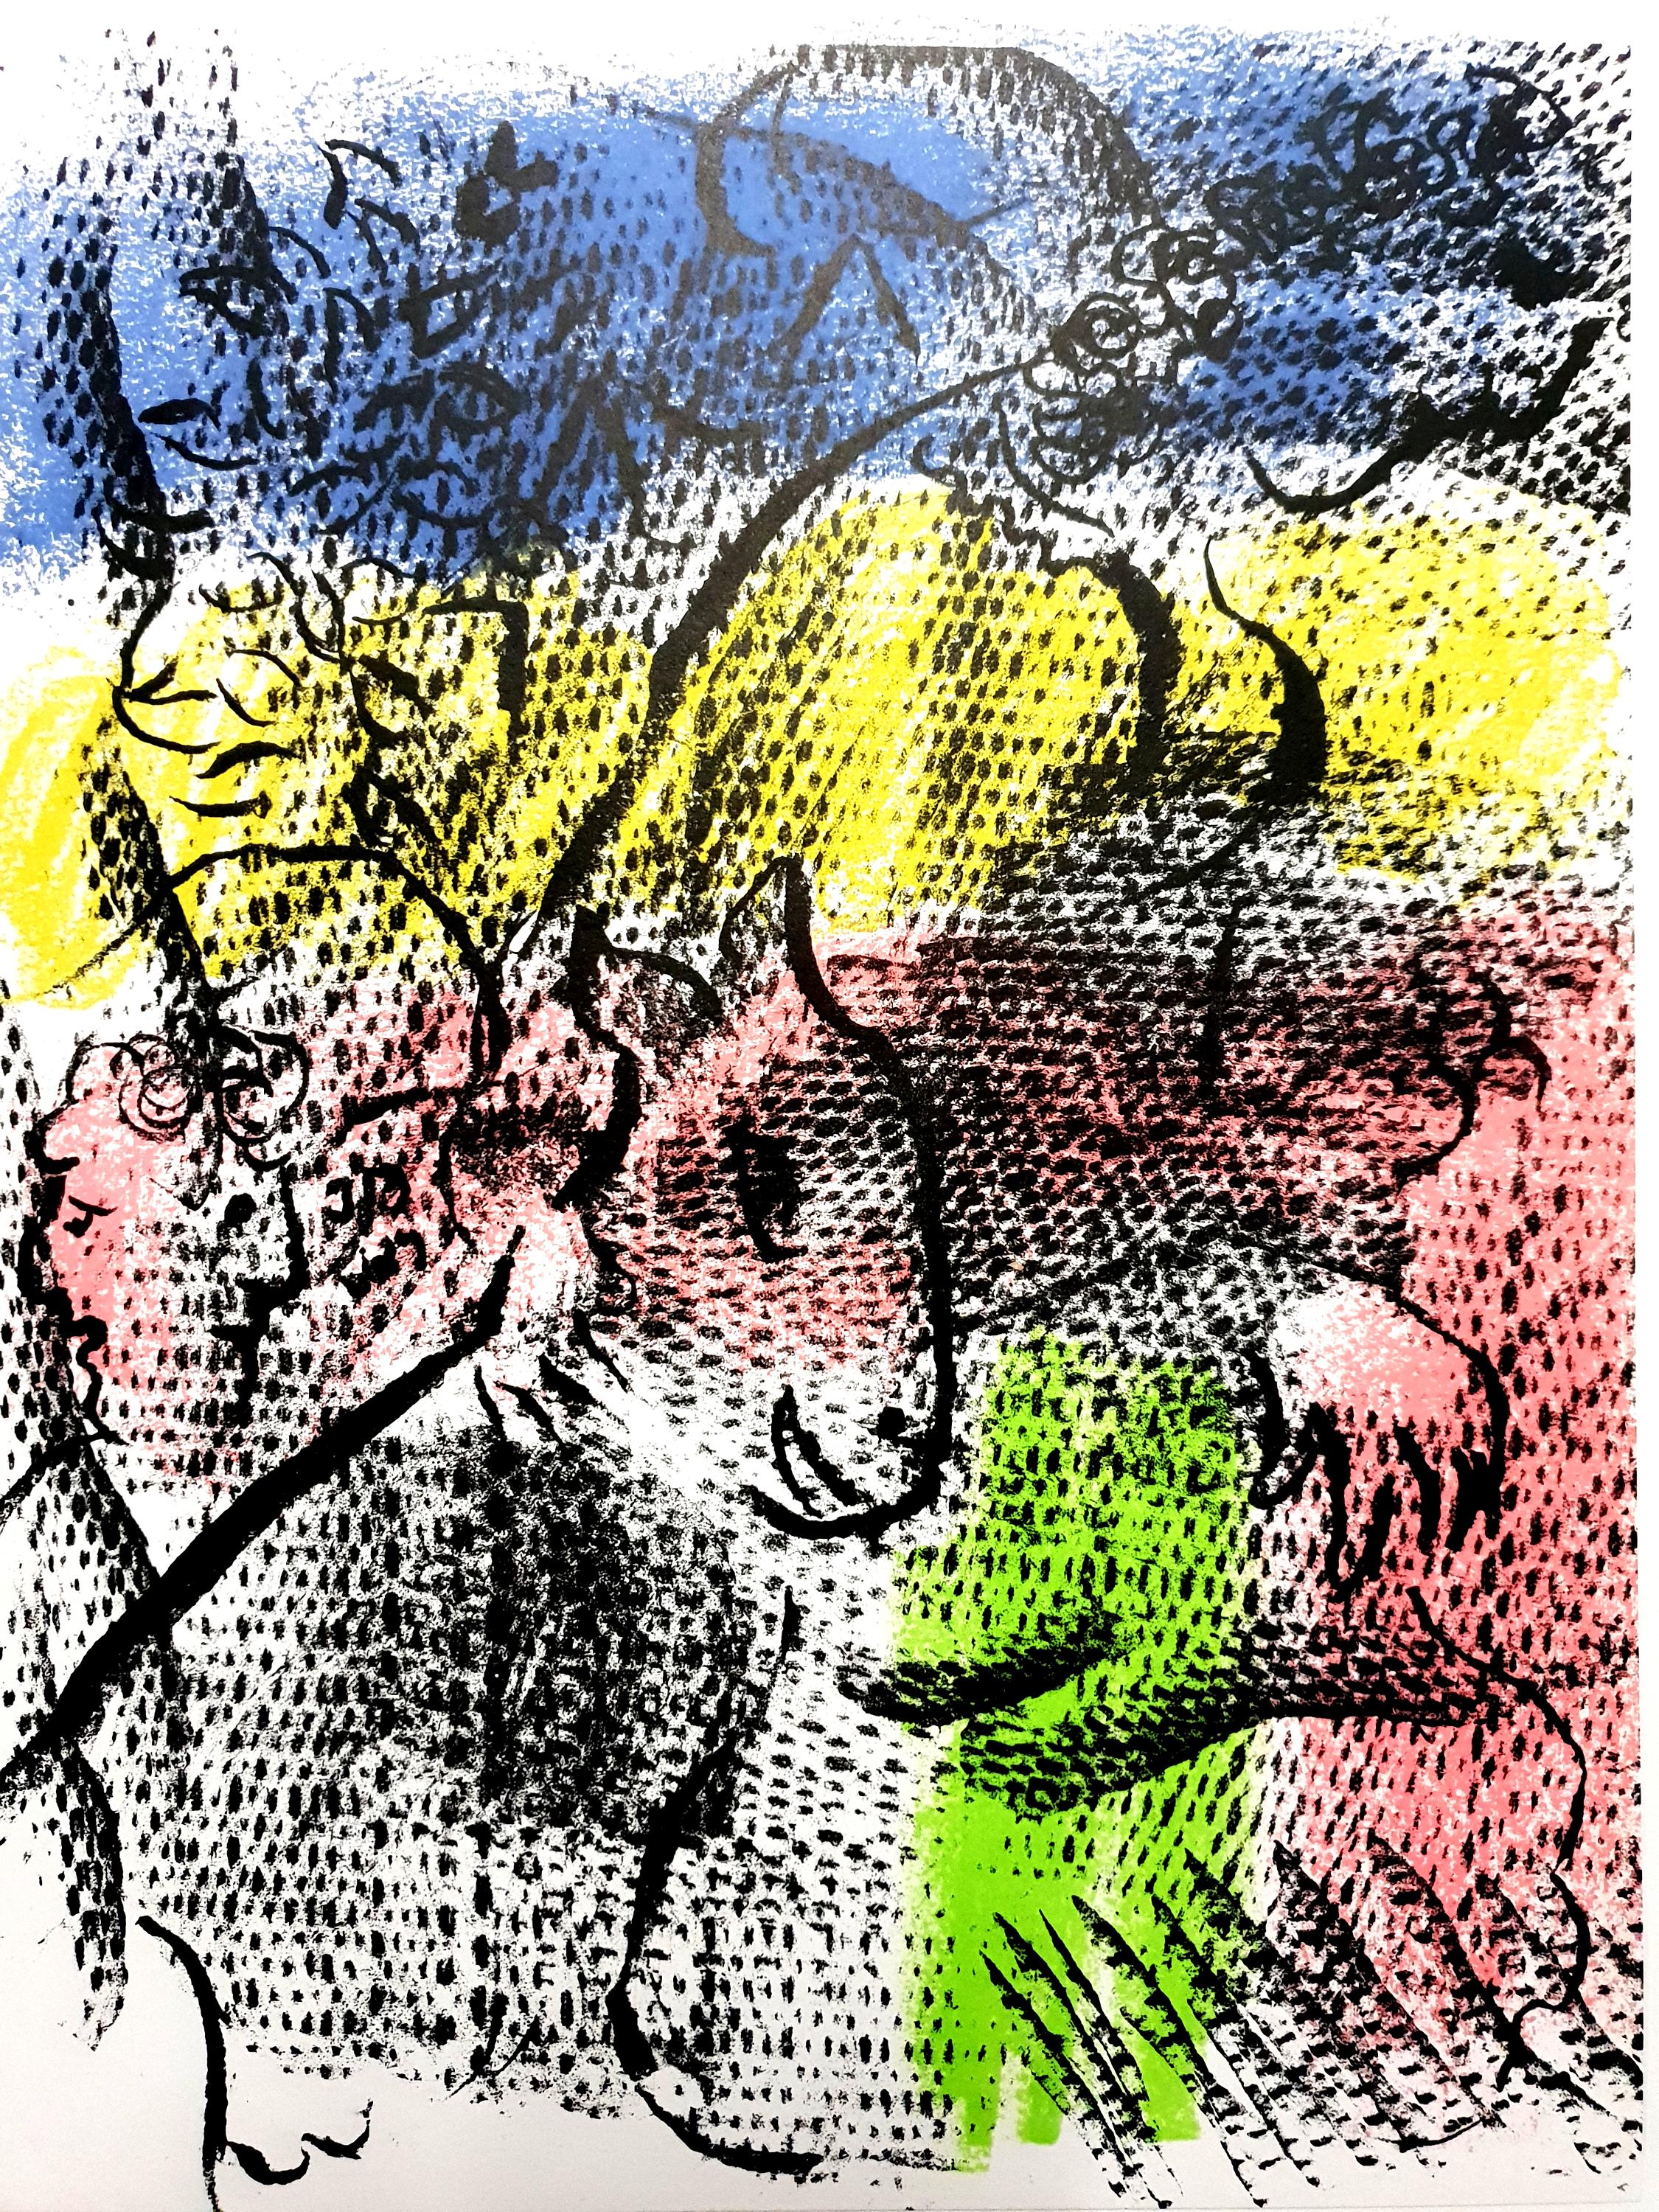 Marc Chagall
Original Lithograph
Title:  Couple With a Goat
1970
Dimensions: 32 x 24 cm
From the art revue XXè siècle
Reference: Mourlot #608
Unsigned and unumbered as issued